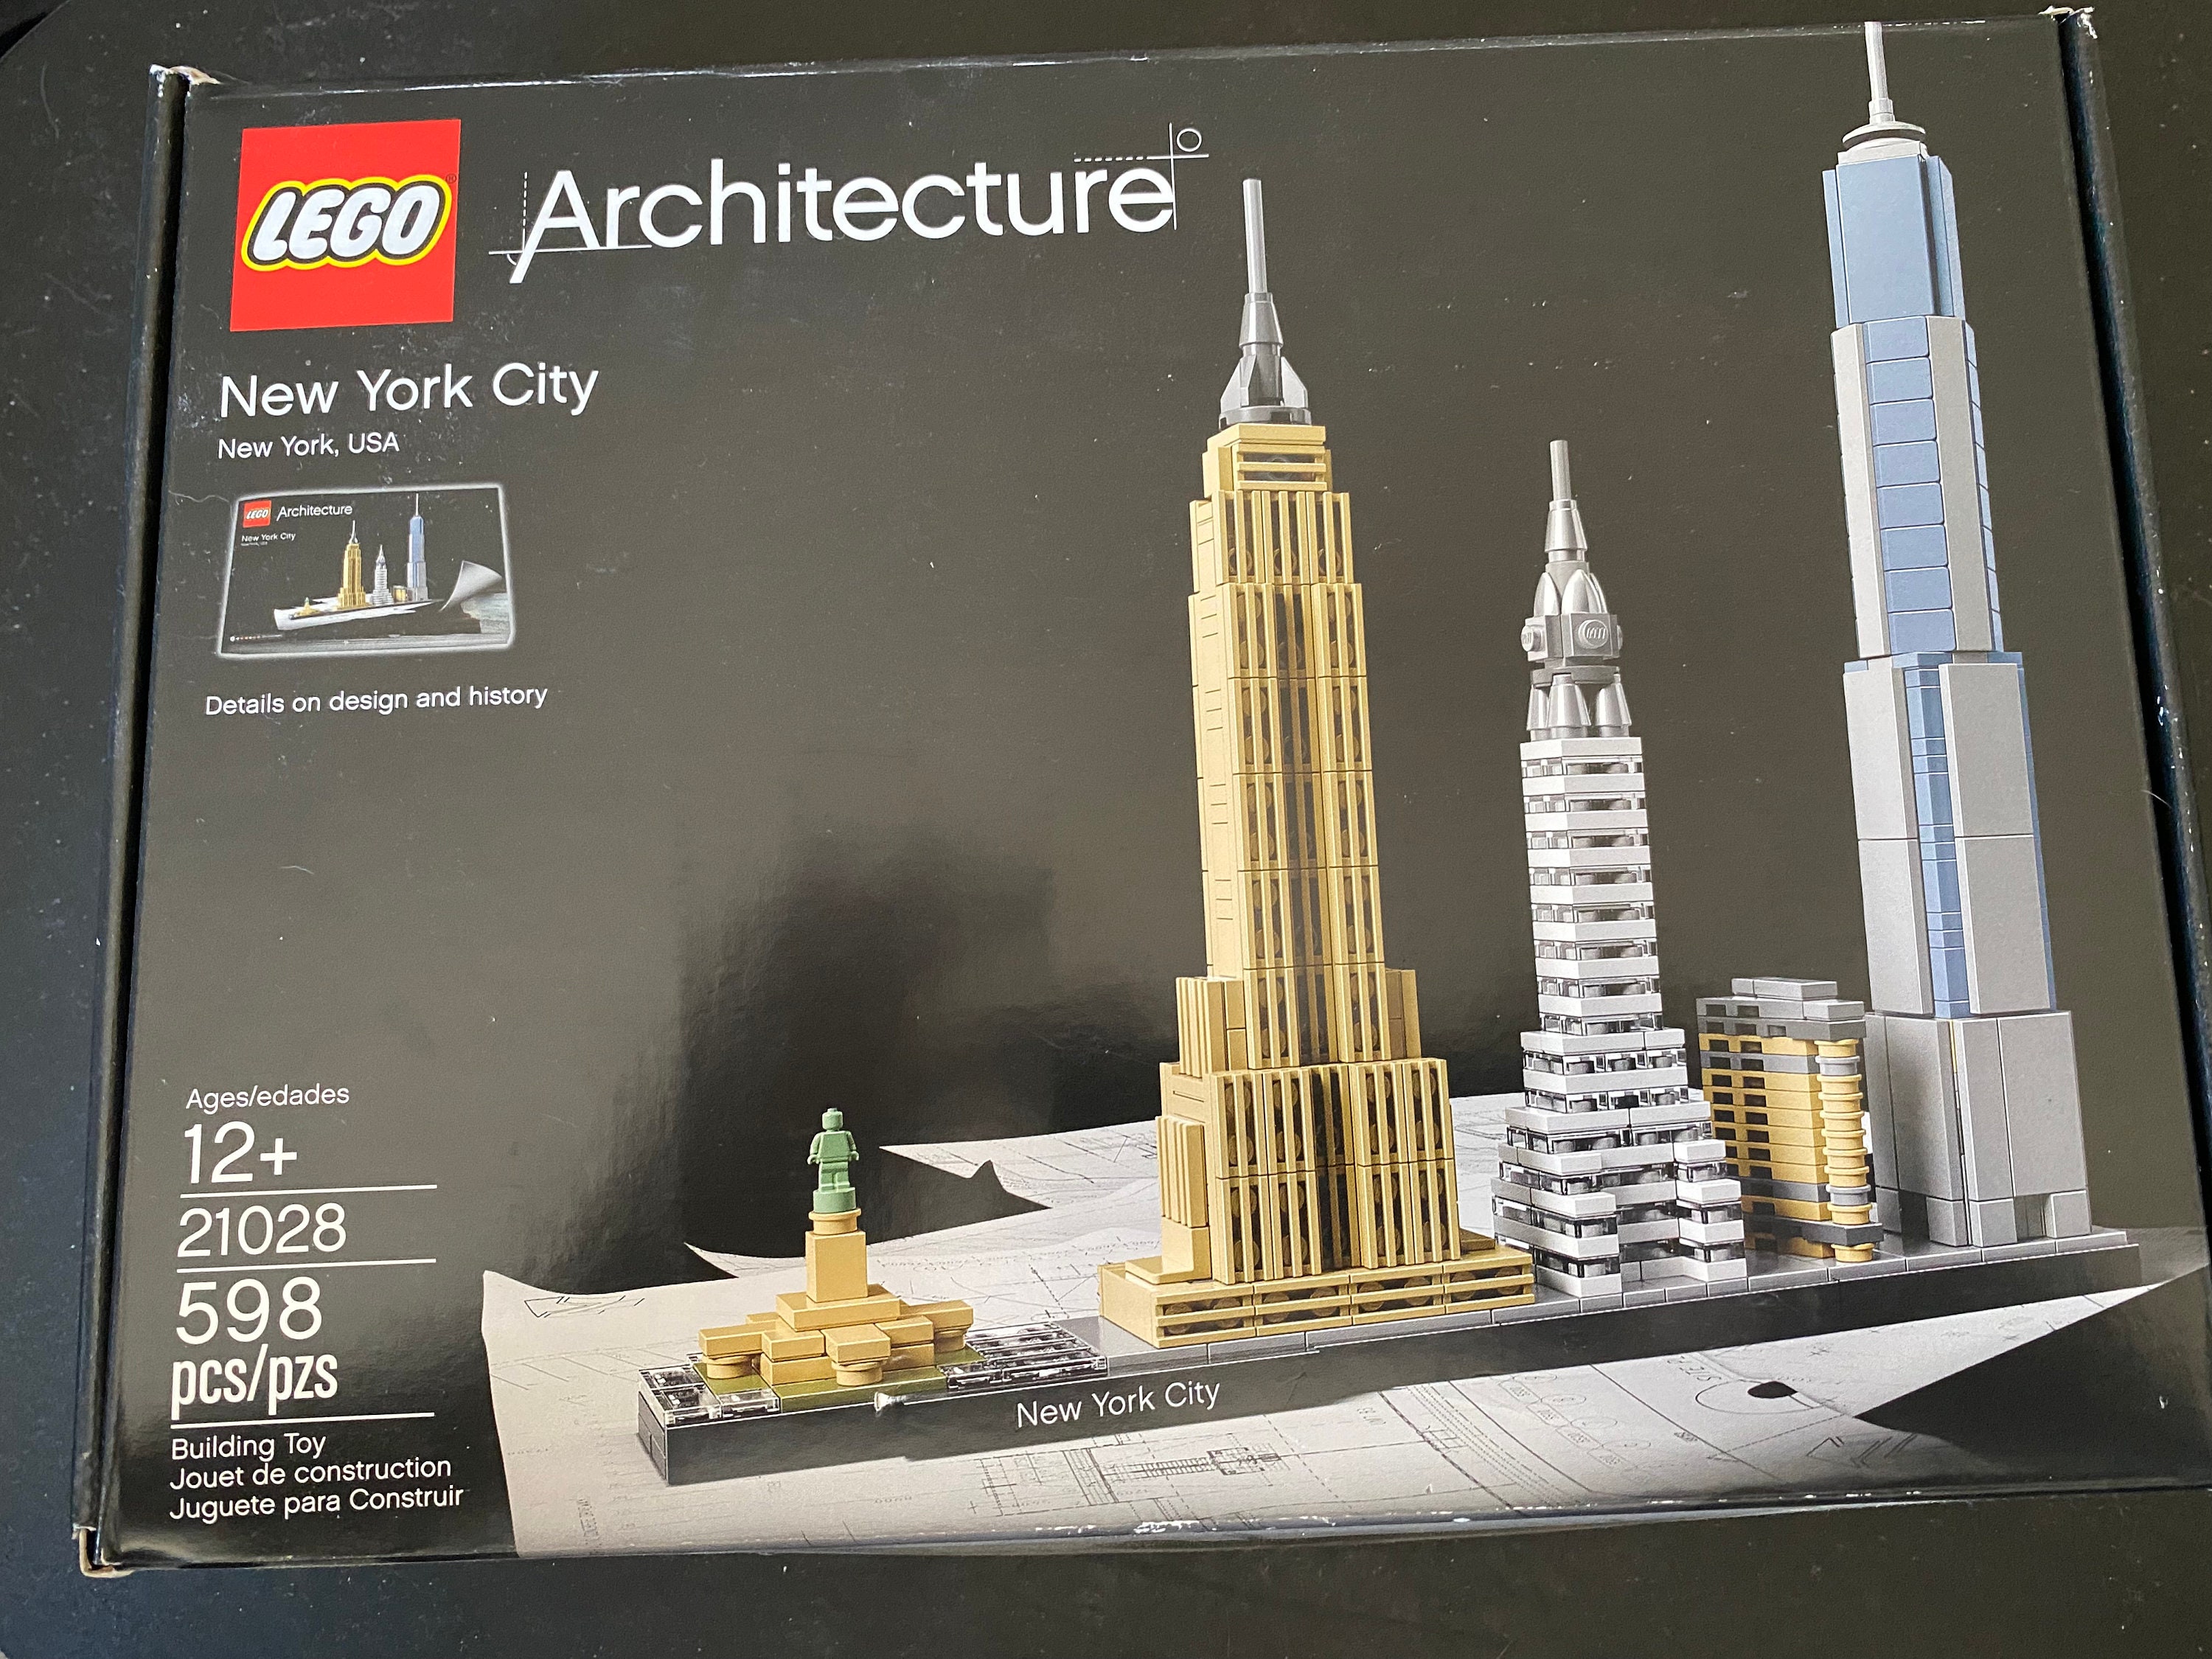 Tegne jeans fungere LEGO Architecture: New York City Boxed Set of 598 Pieces - Etsy